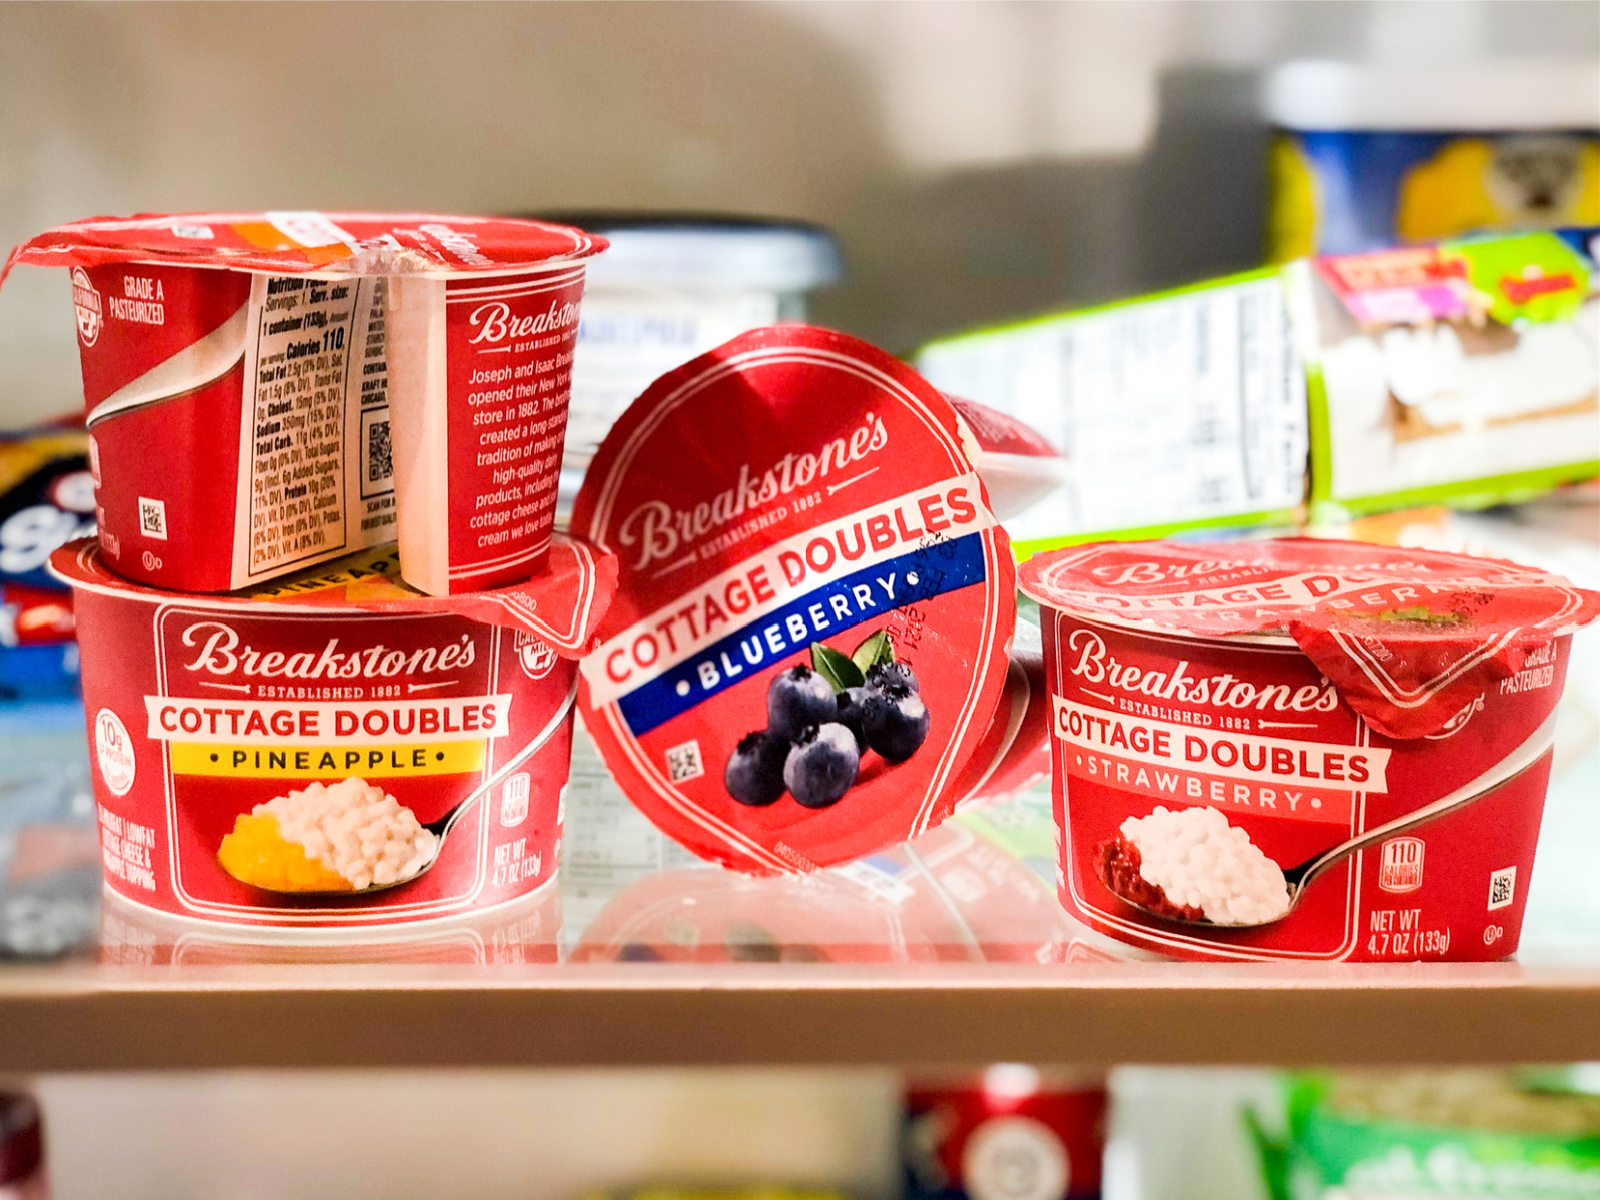 Scrumptious Snacking Made Easy - Breakstone’s Cottage Doubles Are On Sale 5/$5 At Publix on I Heart Publix 2